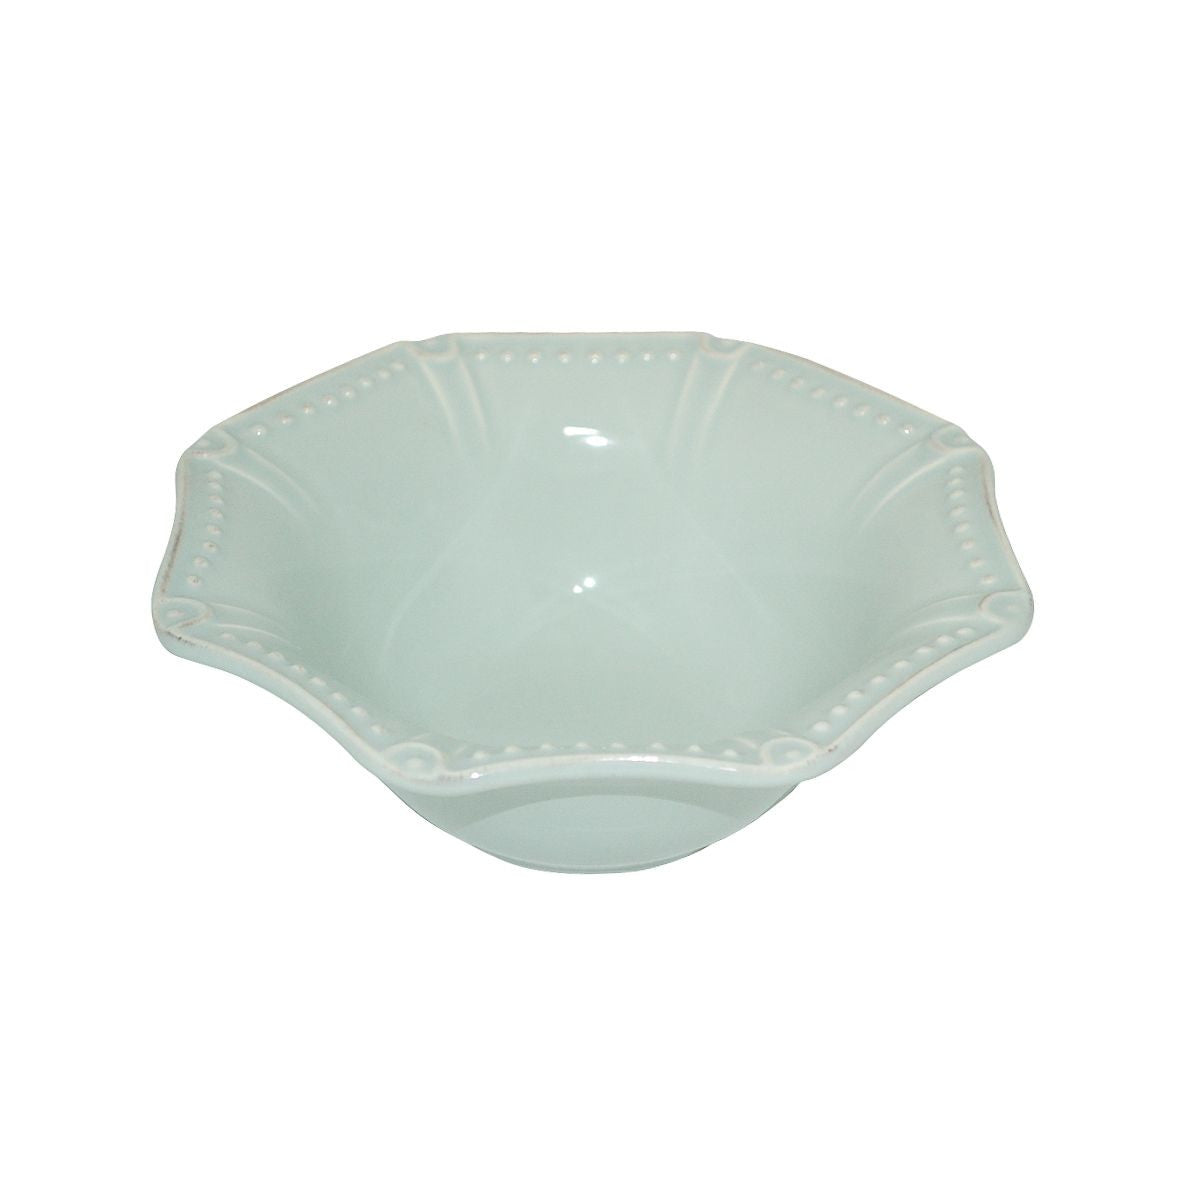 Isabella Ice Blue Cereal Bowl